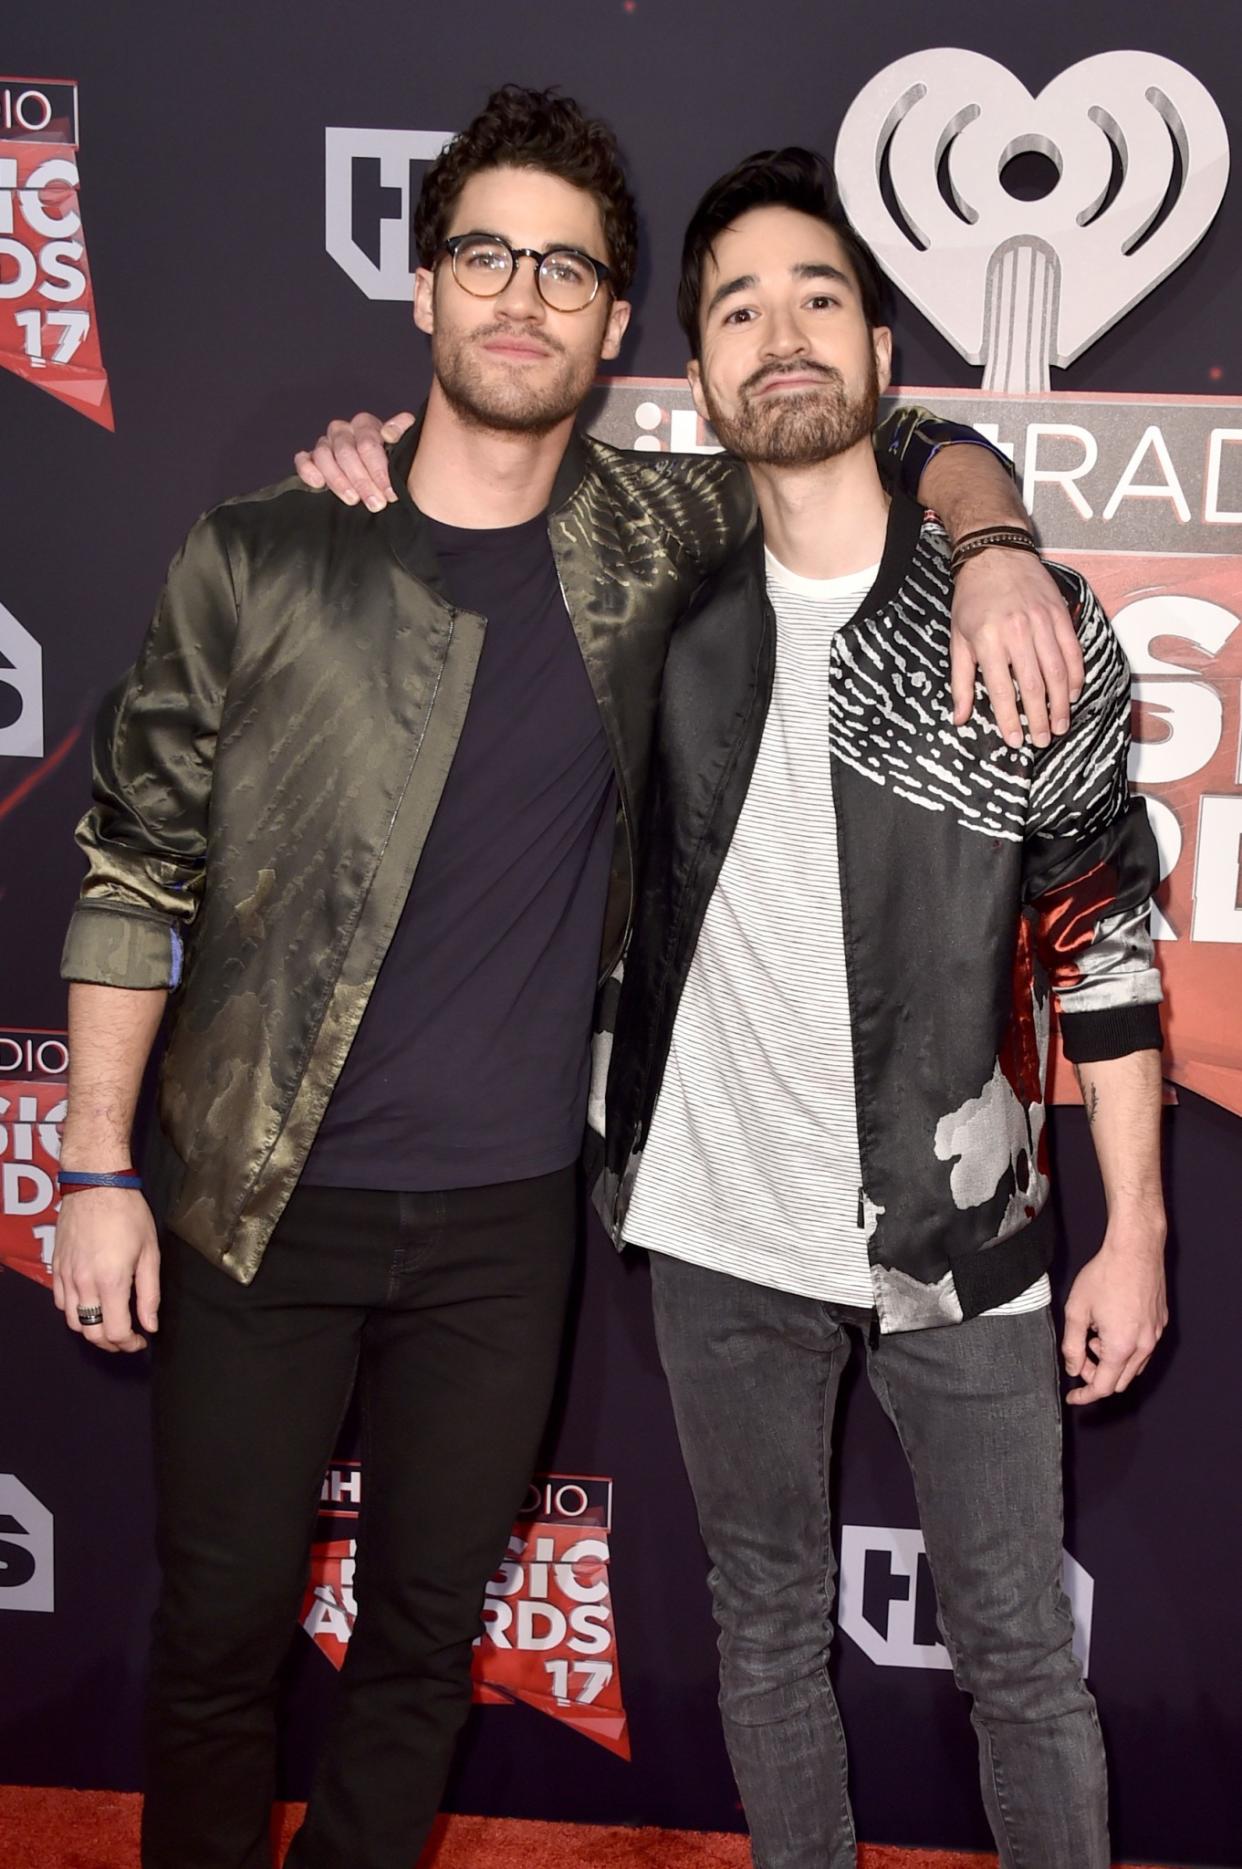 Musicians Darren Criss, left, and Chuck Criss of Computer Games attend the 2017 iHeartRadio Music Awards, which broadcast live on Turner’s TBS, TNT, and truTV at the Forum on March 5, 2017 in Inglewood, Calif. (Photo by Alberto E. Rodriguez/Getty Images)